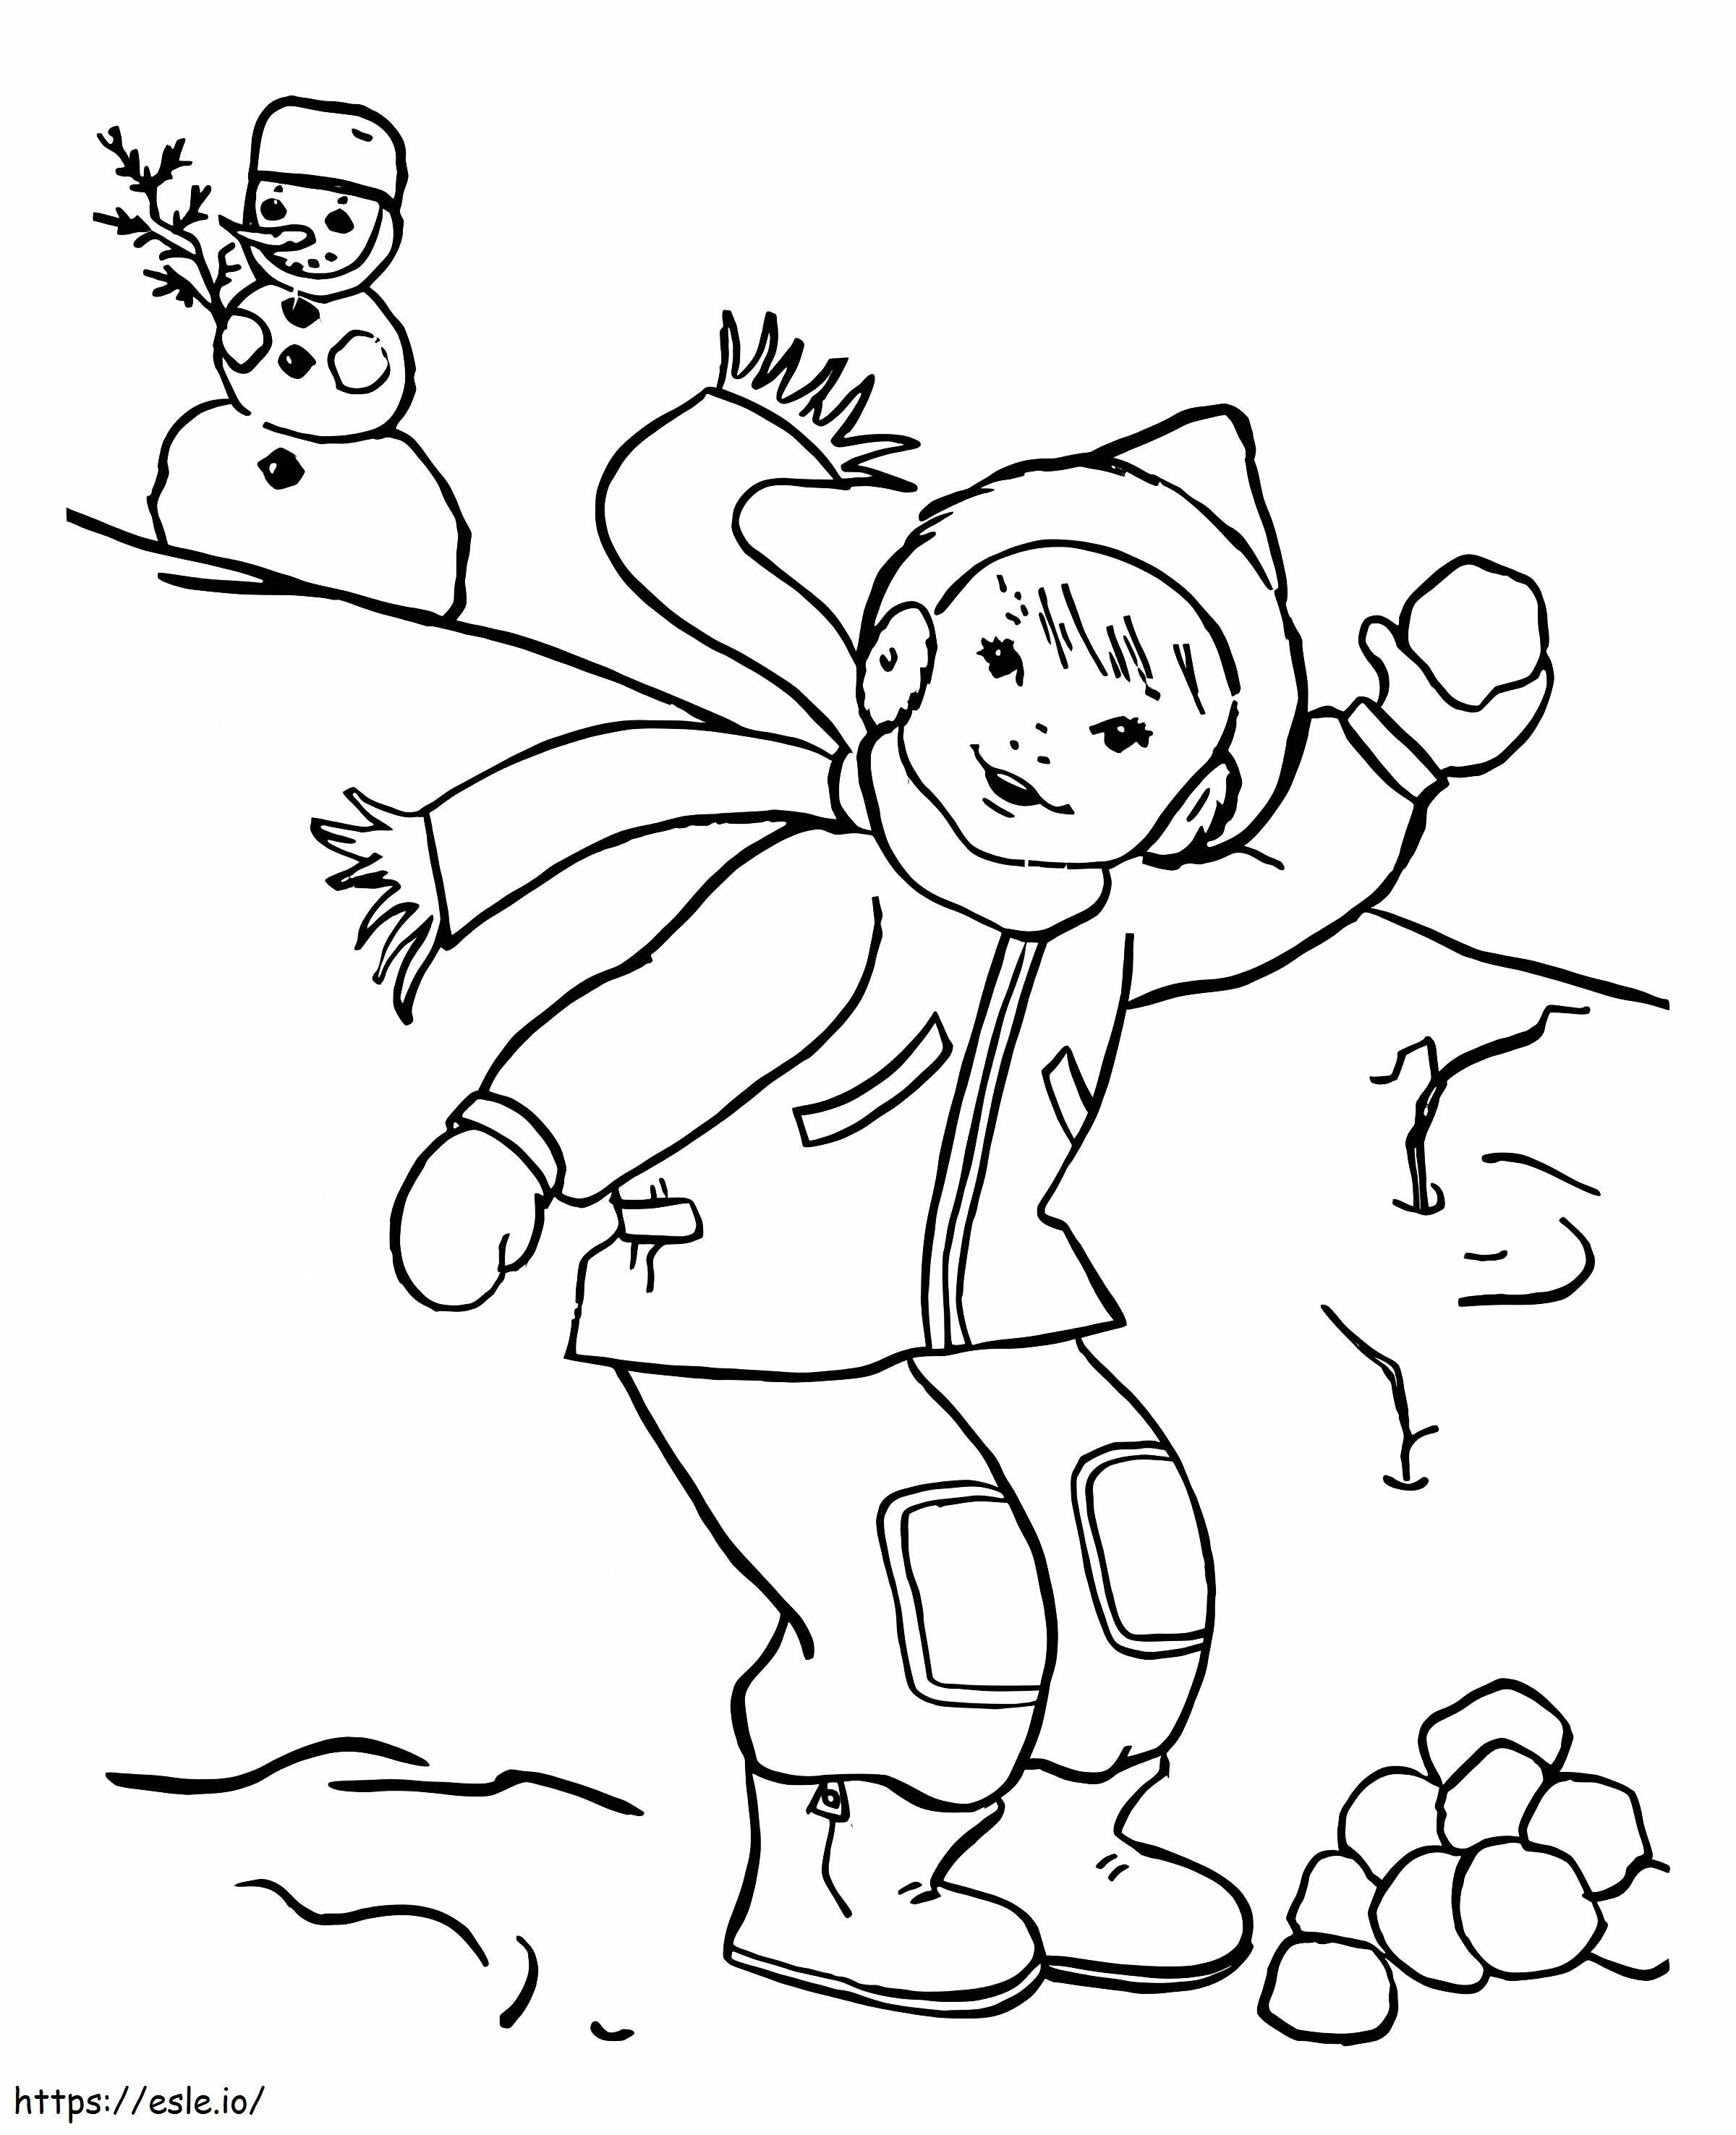 Boy In Snowball Fight coloring page